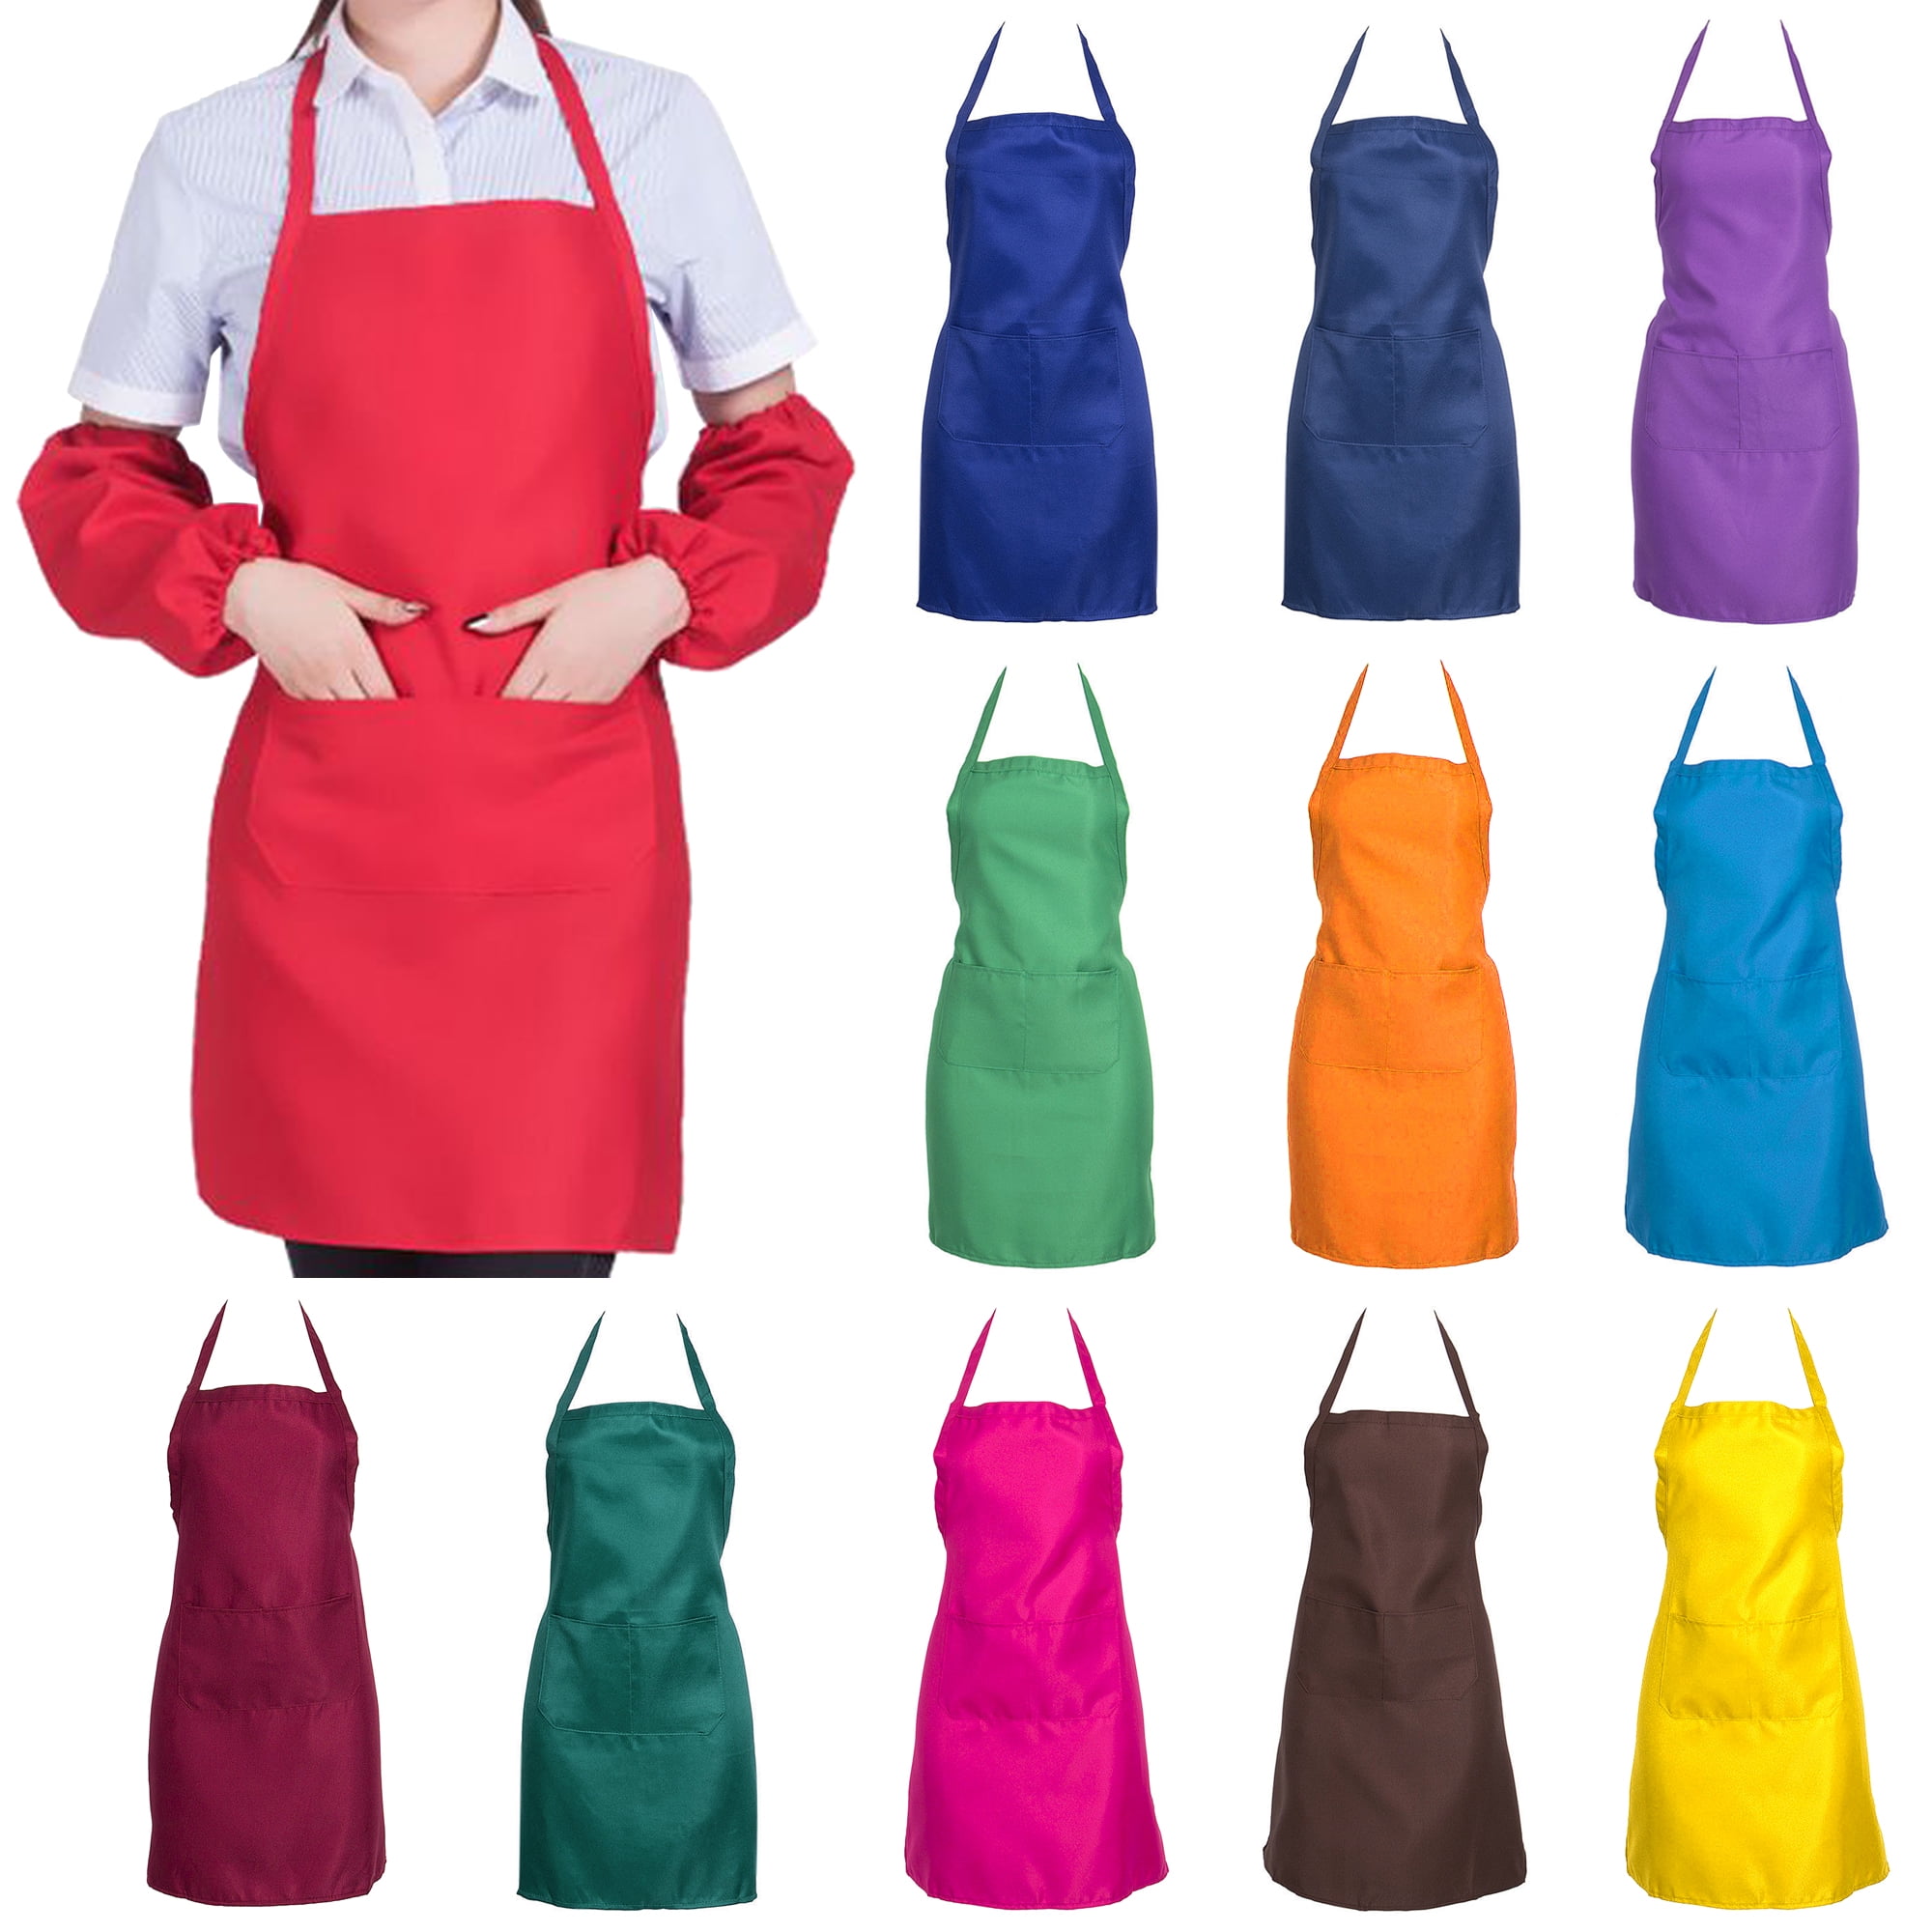 Cuh Cooking Kitchen Apron with Pocket Check Chef Apron Dress for Women Men Adults for Baking Restaurant Tool, Green